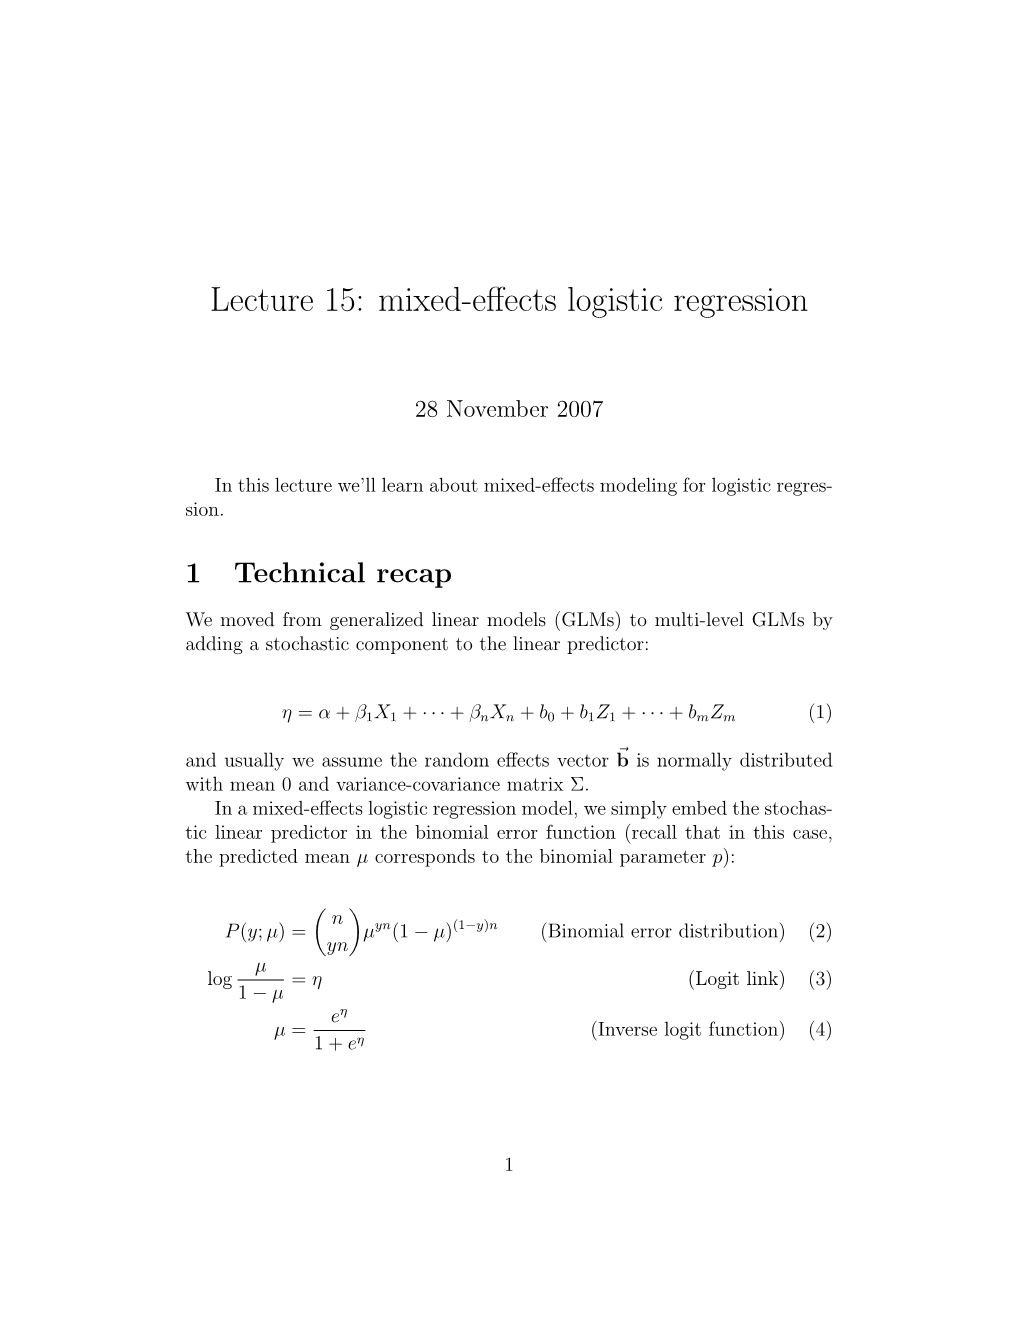 Lecture 15: Mixed-Effects Logistic Regression